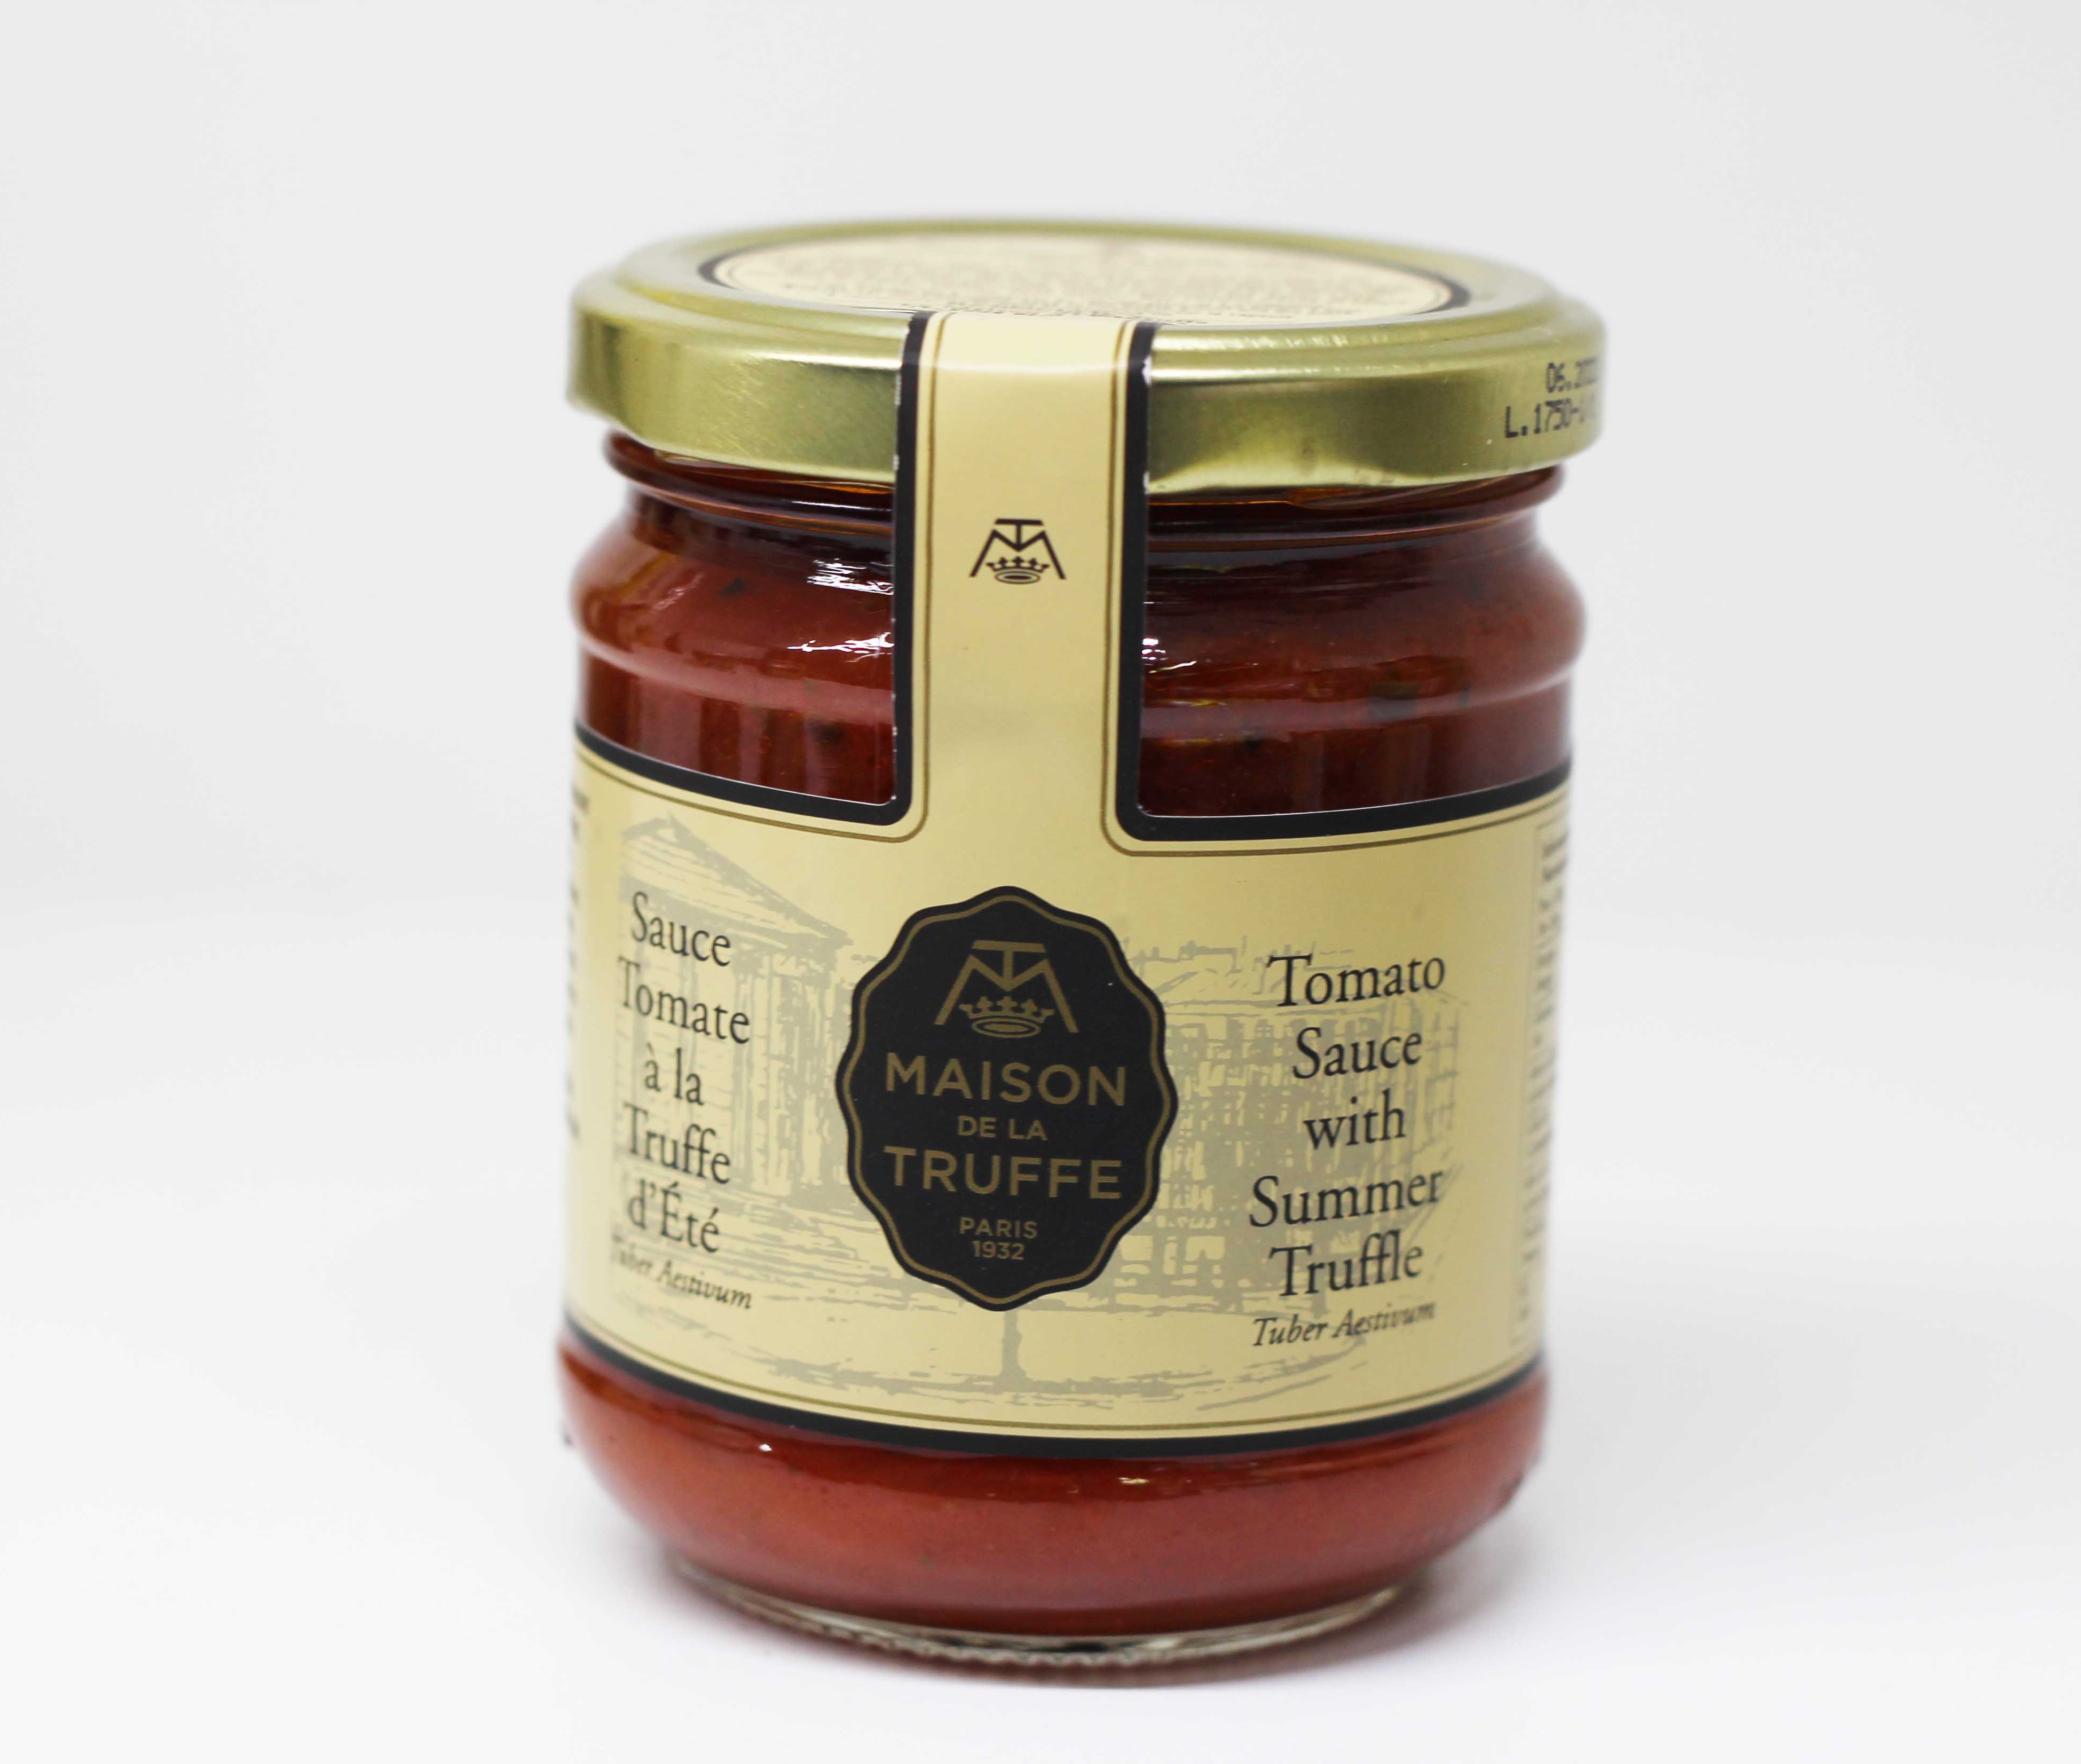 Tomato Sauce with Summer truffle